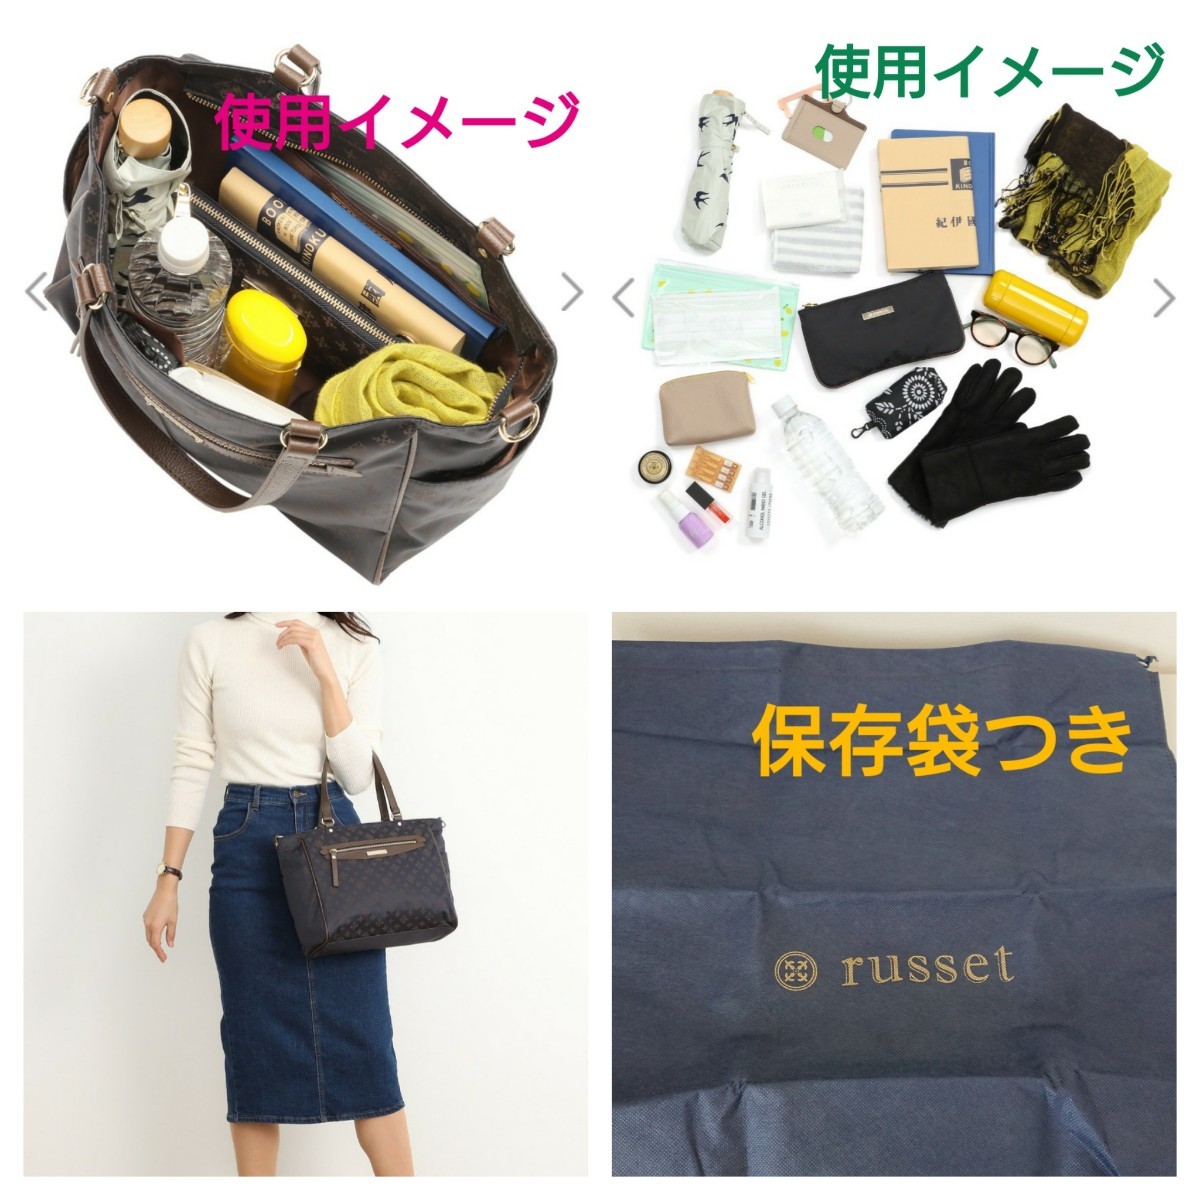 russet  ラシット  トートバッグ　グレー ピンク